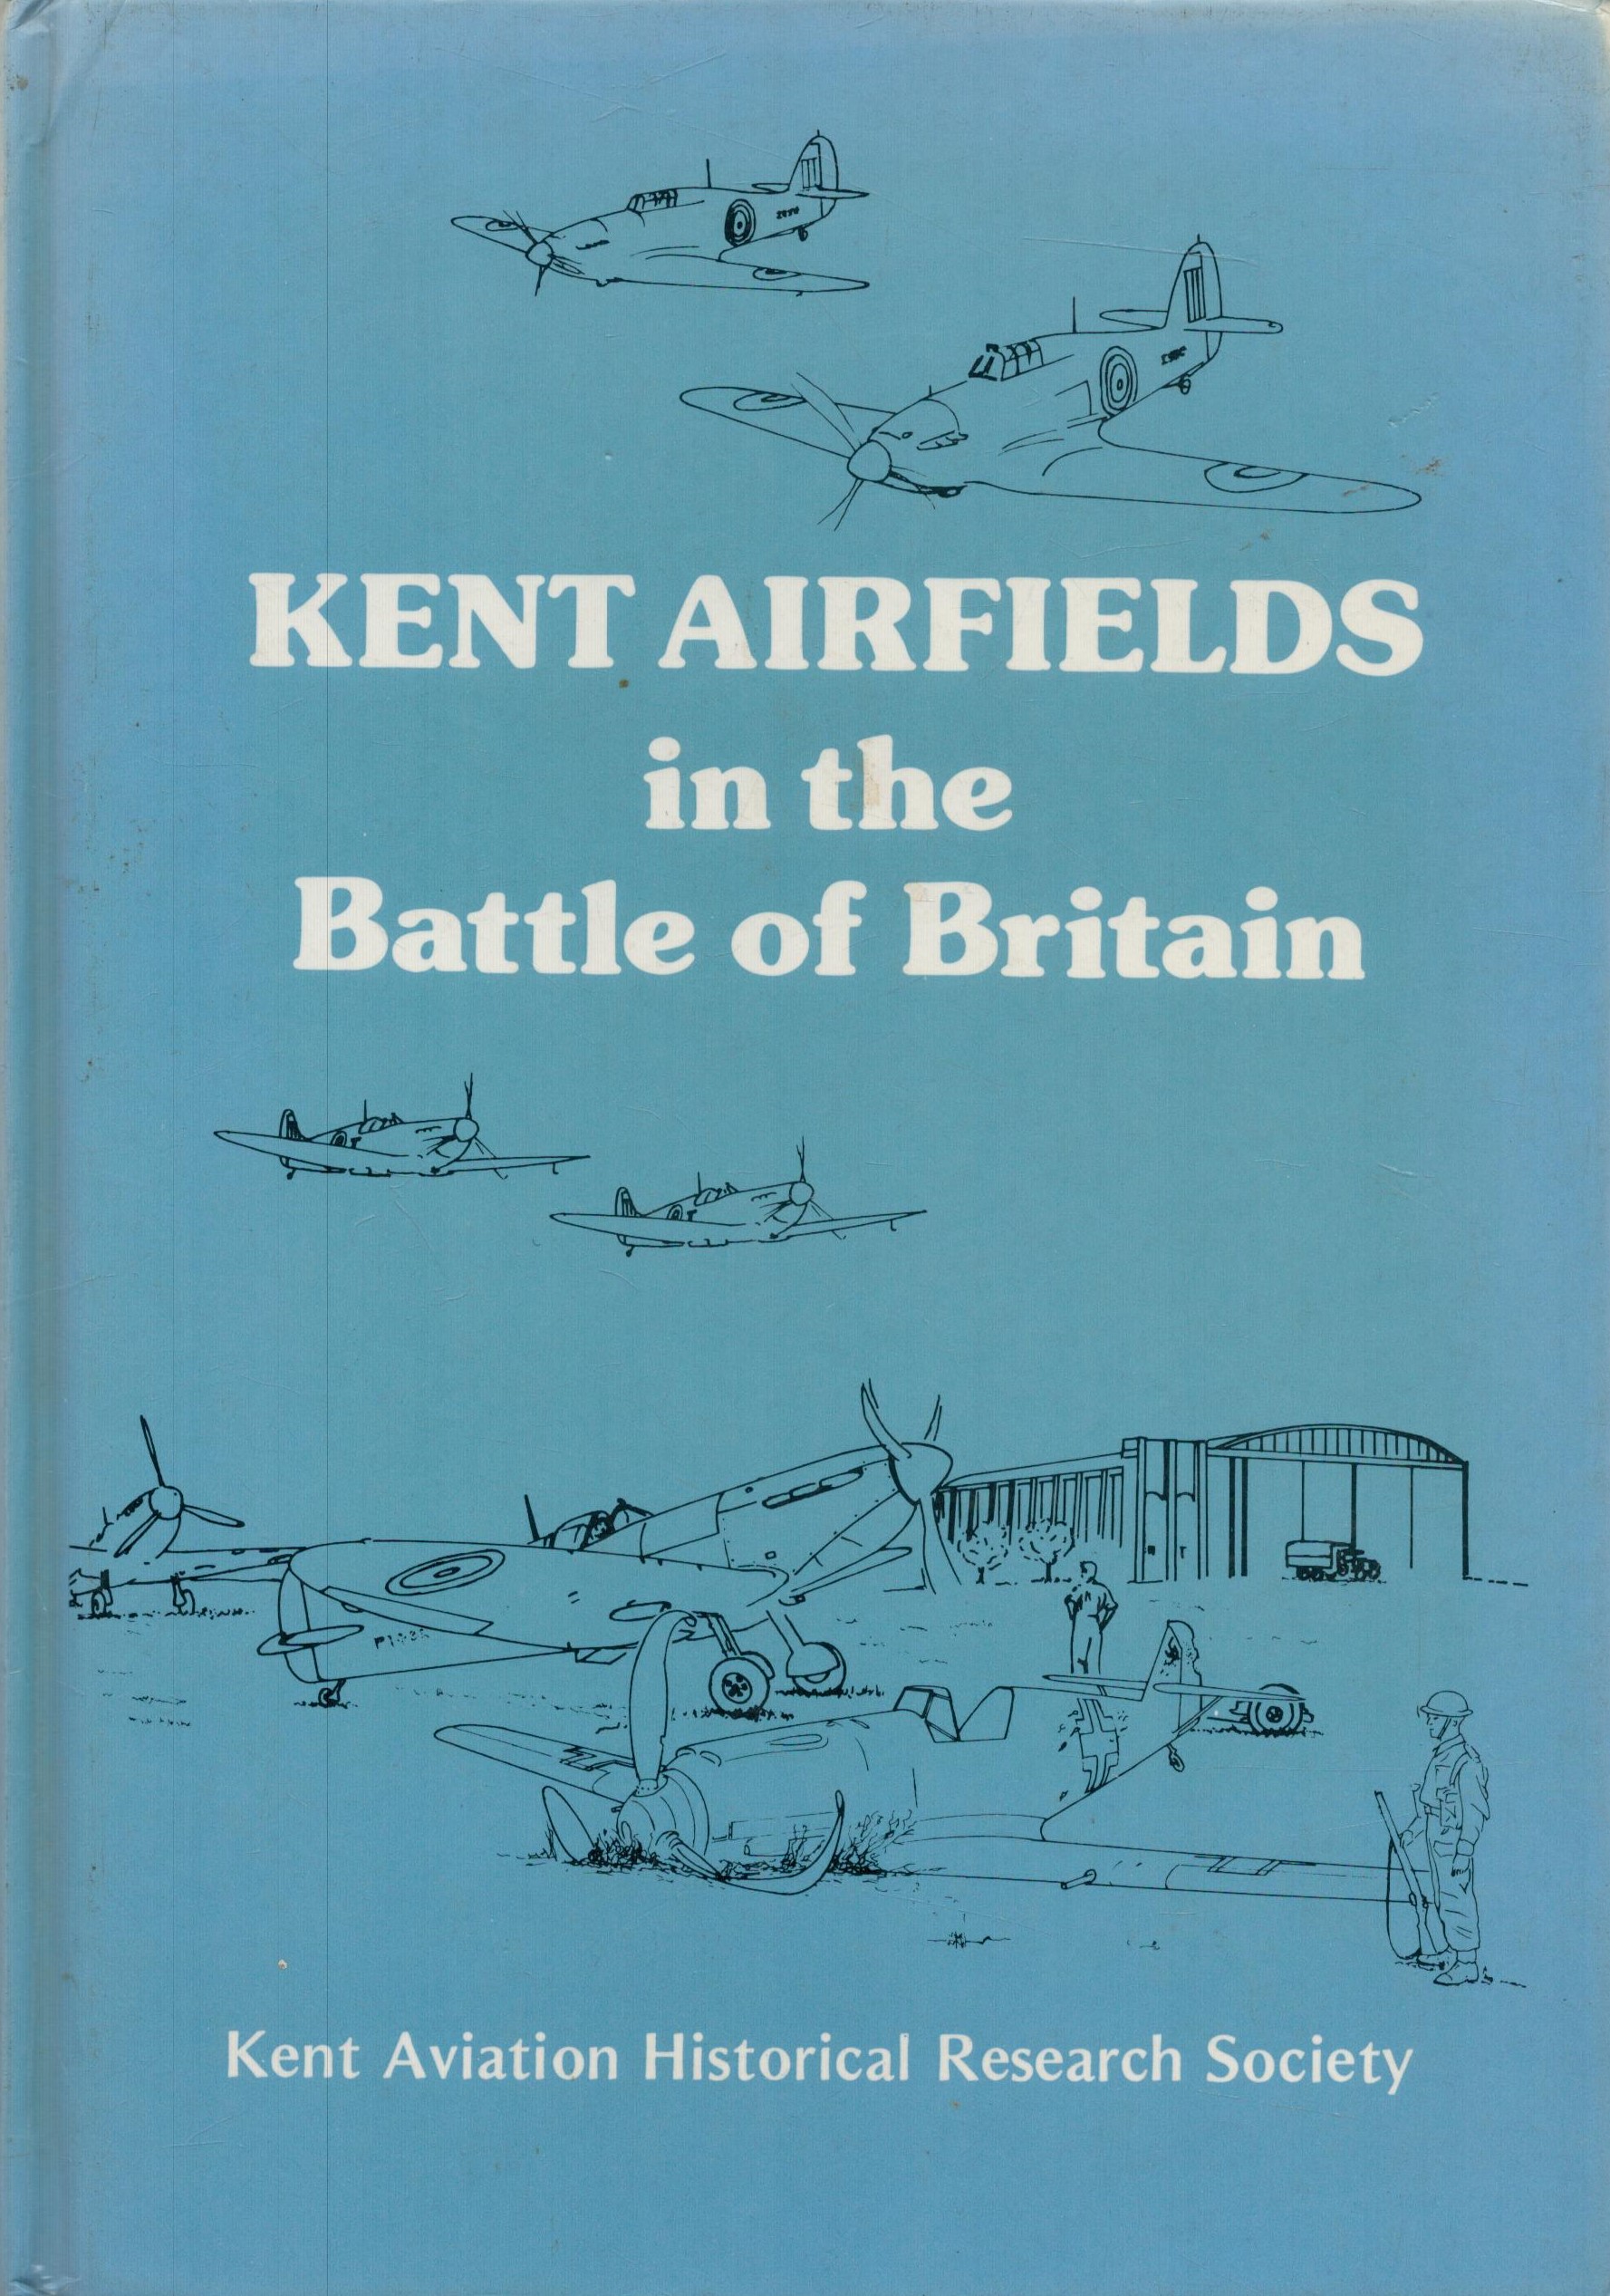 Kent Airfields in The Battle of Britain Hardback Book by The Kent Aviation Historical Research